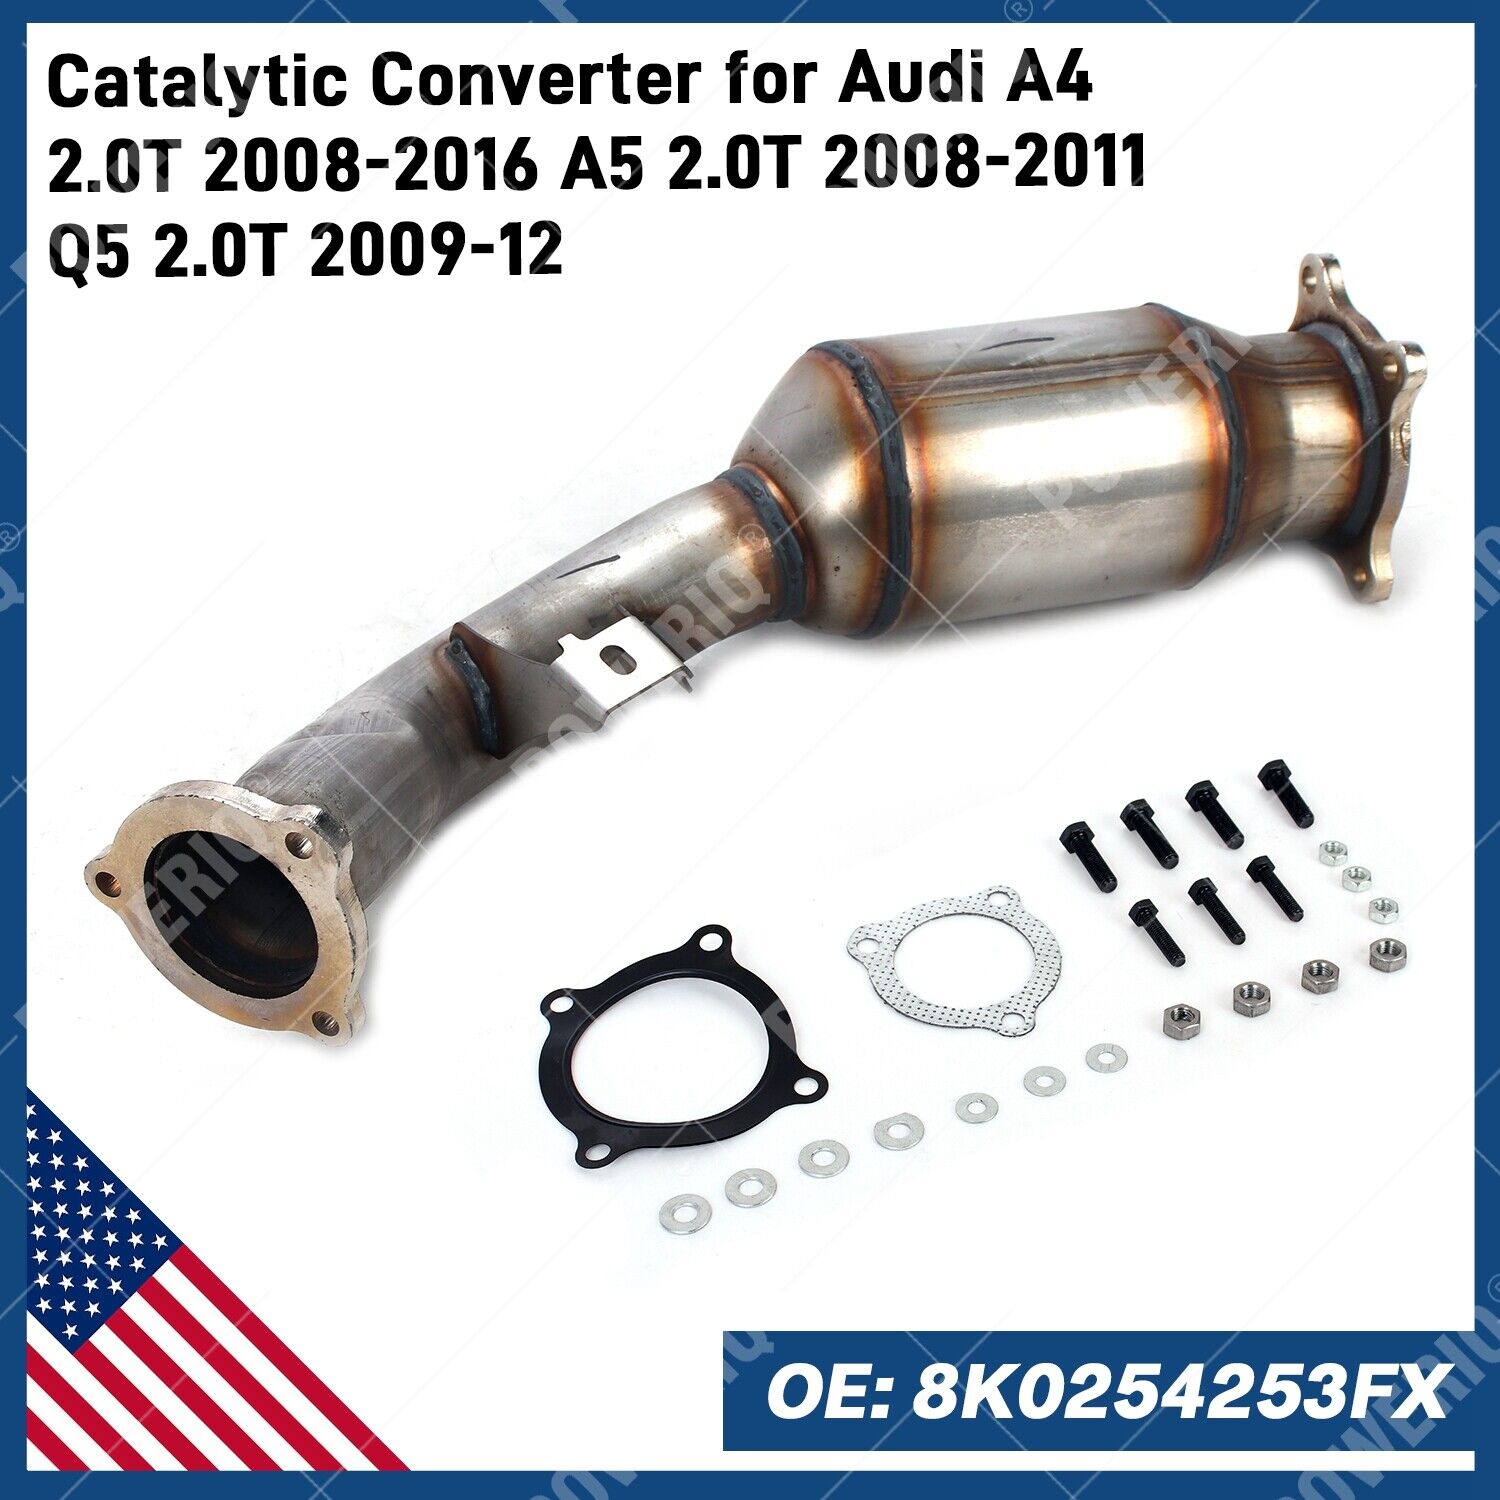 Catalytic Converter for Audi A4 2.0T 2008-2016 A5 2.0T 2008-2011 Q5 2.0T 2009-12